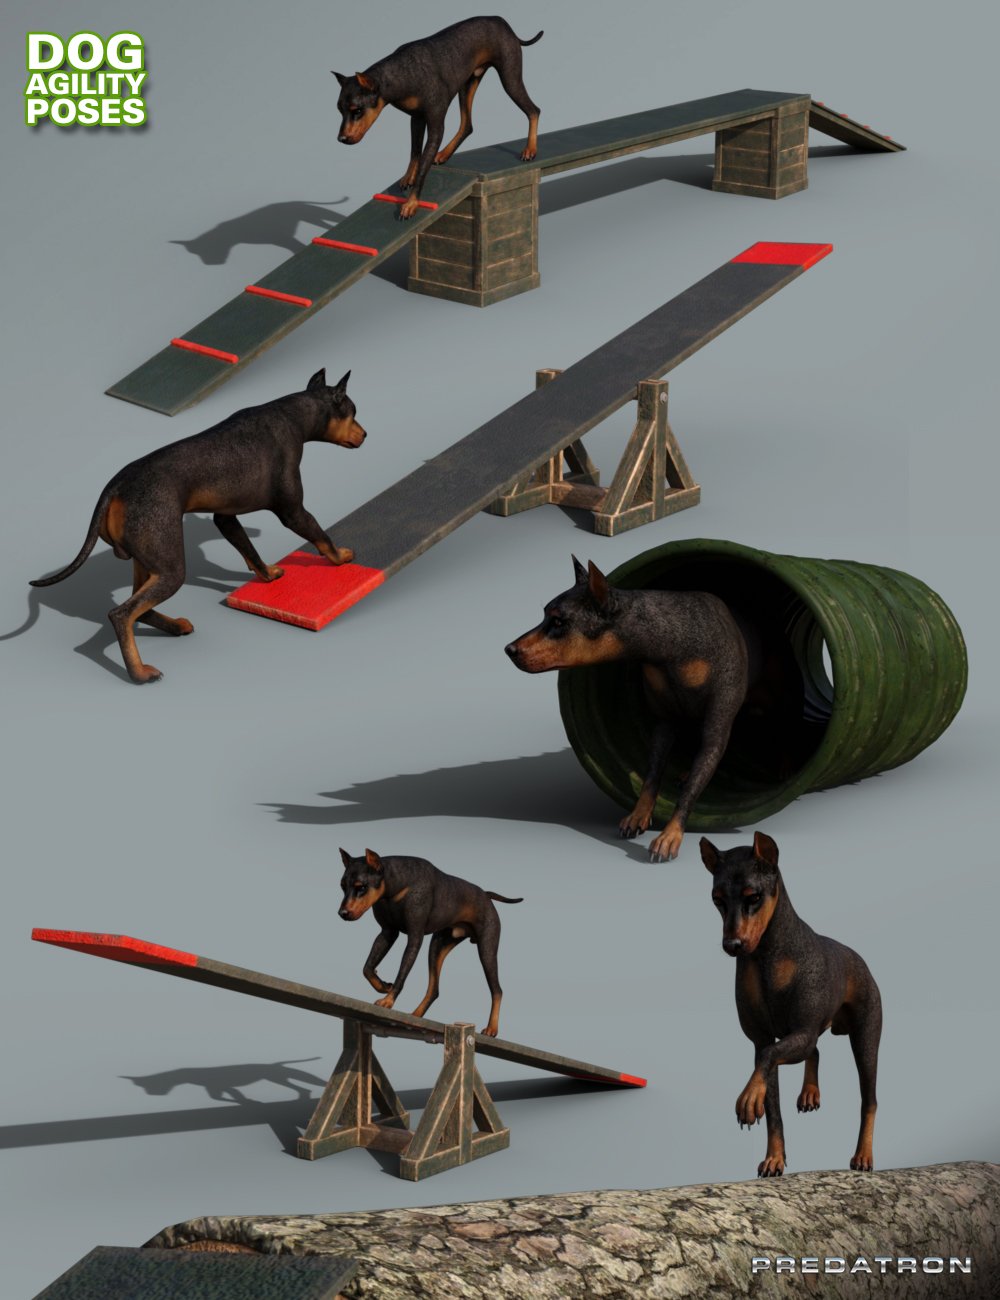 Dog Agility Course Poses by: Predatron, 3D Models by Daz 3D